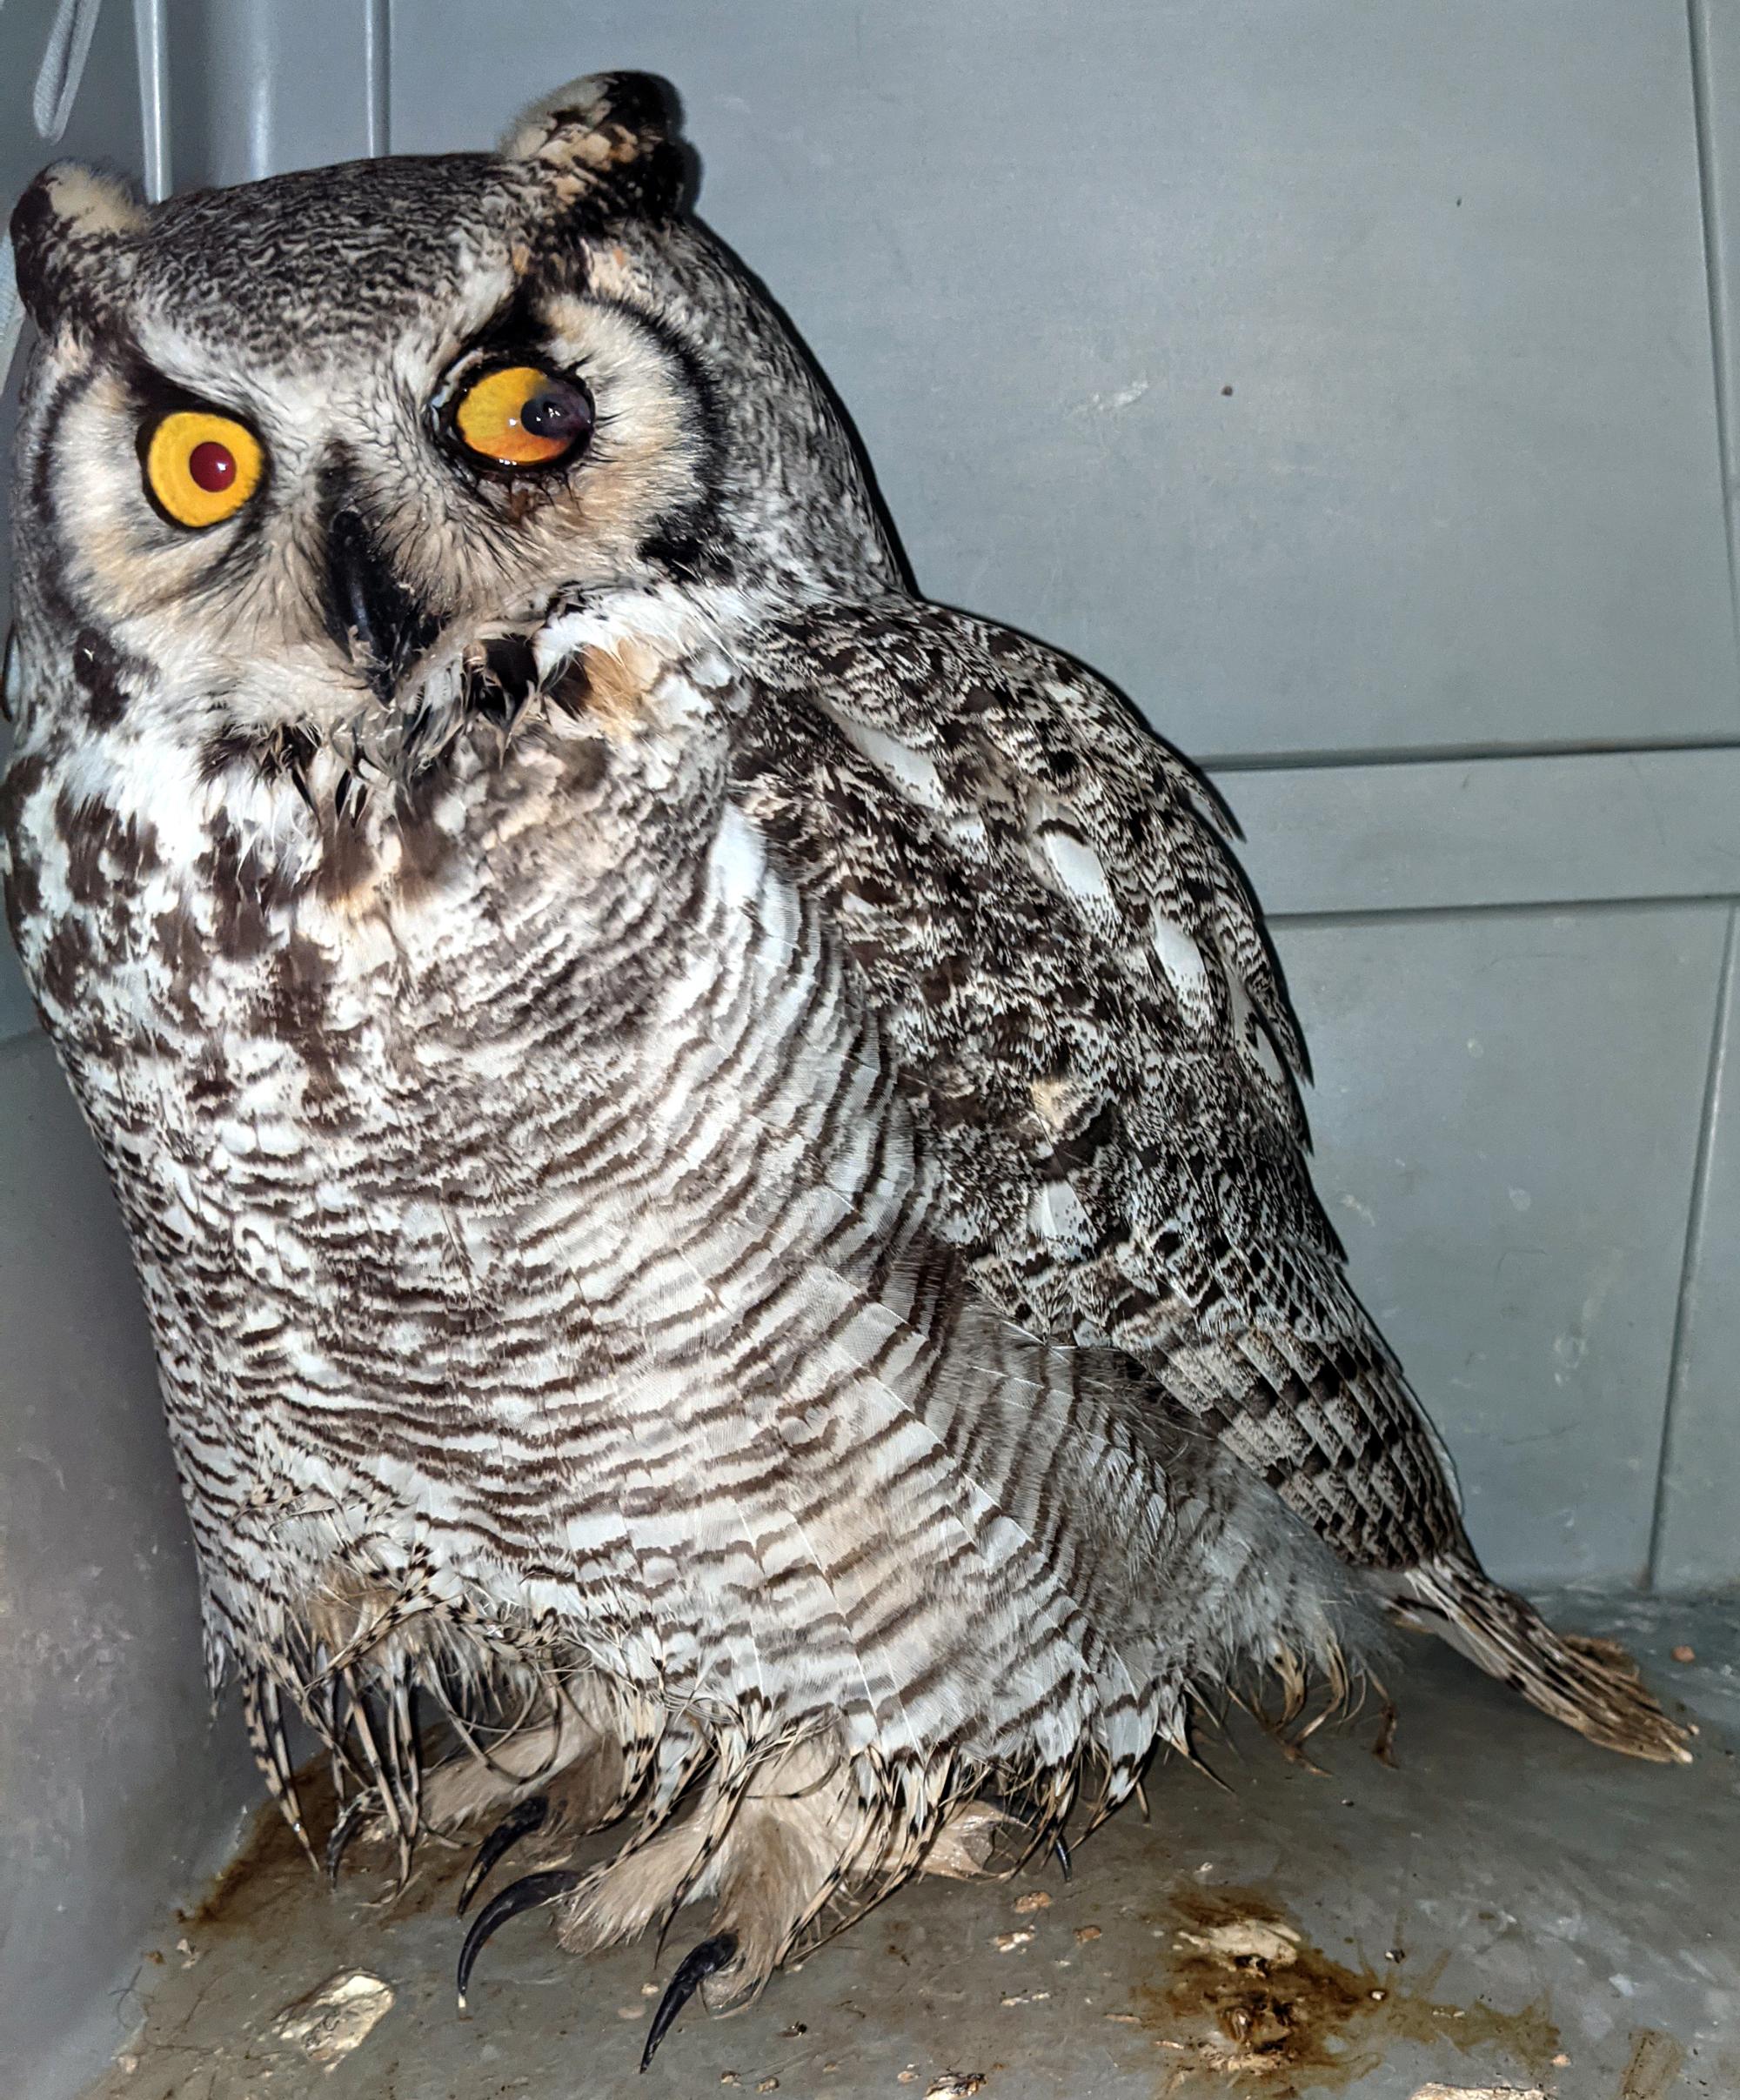 Wyoming (2001-2022) - Rescued Owl